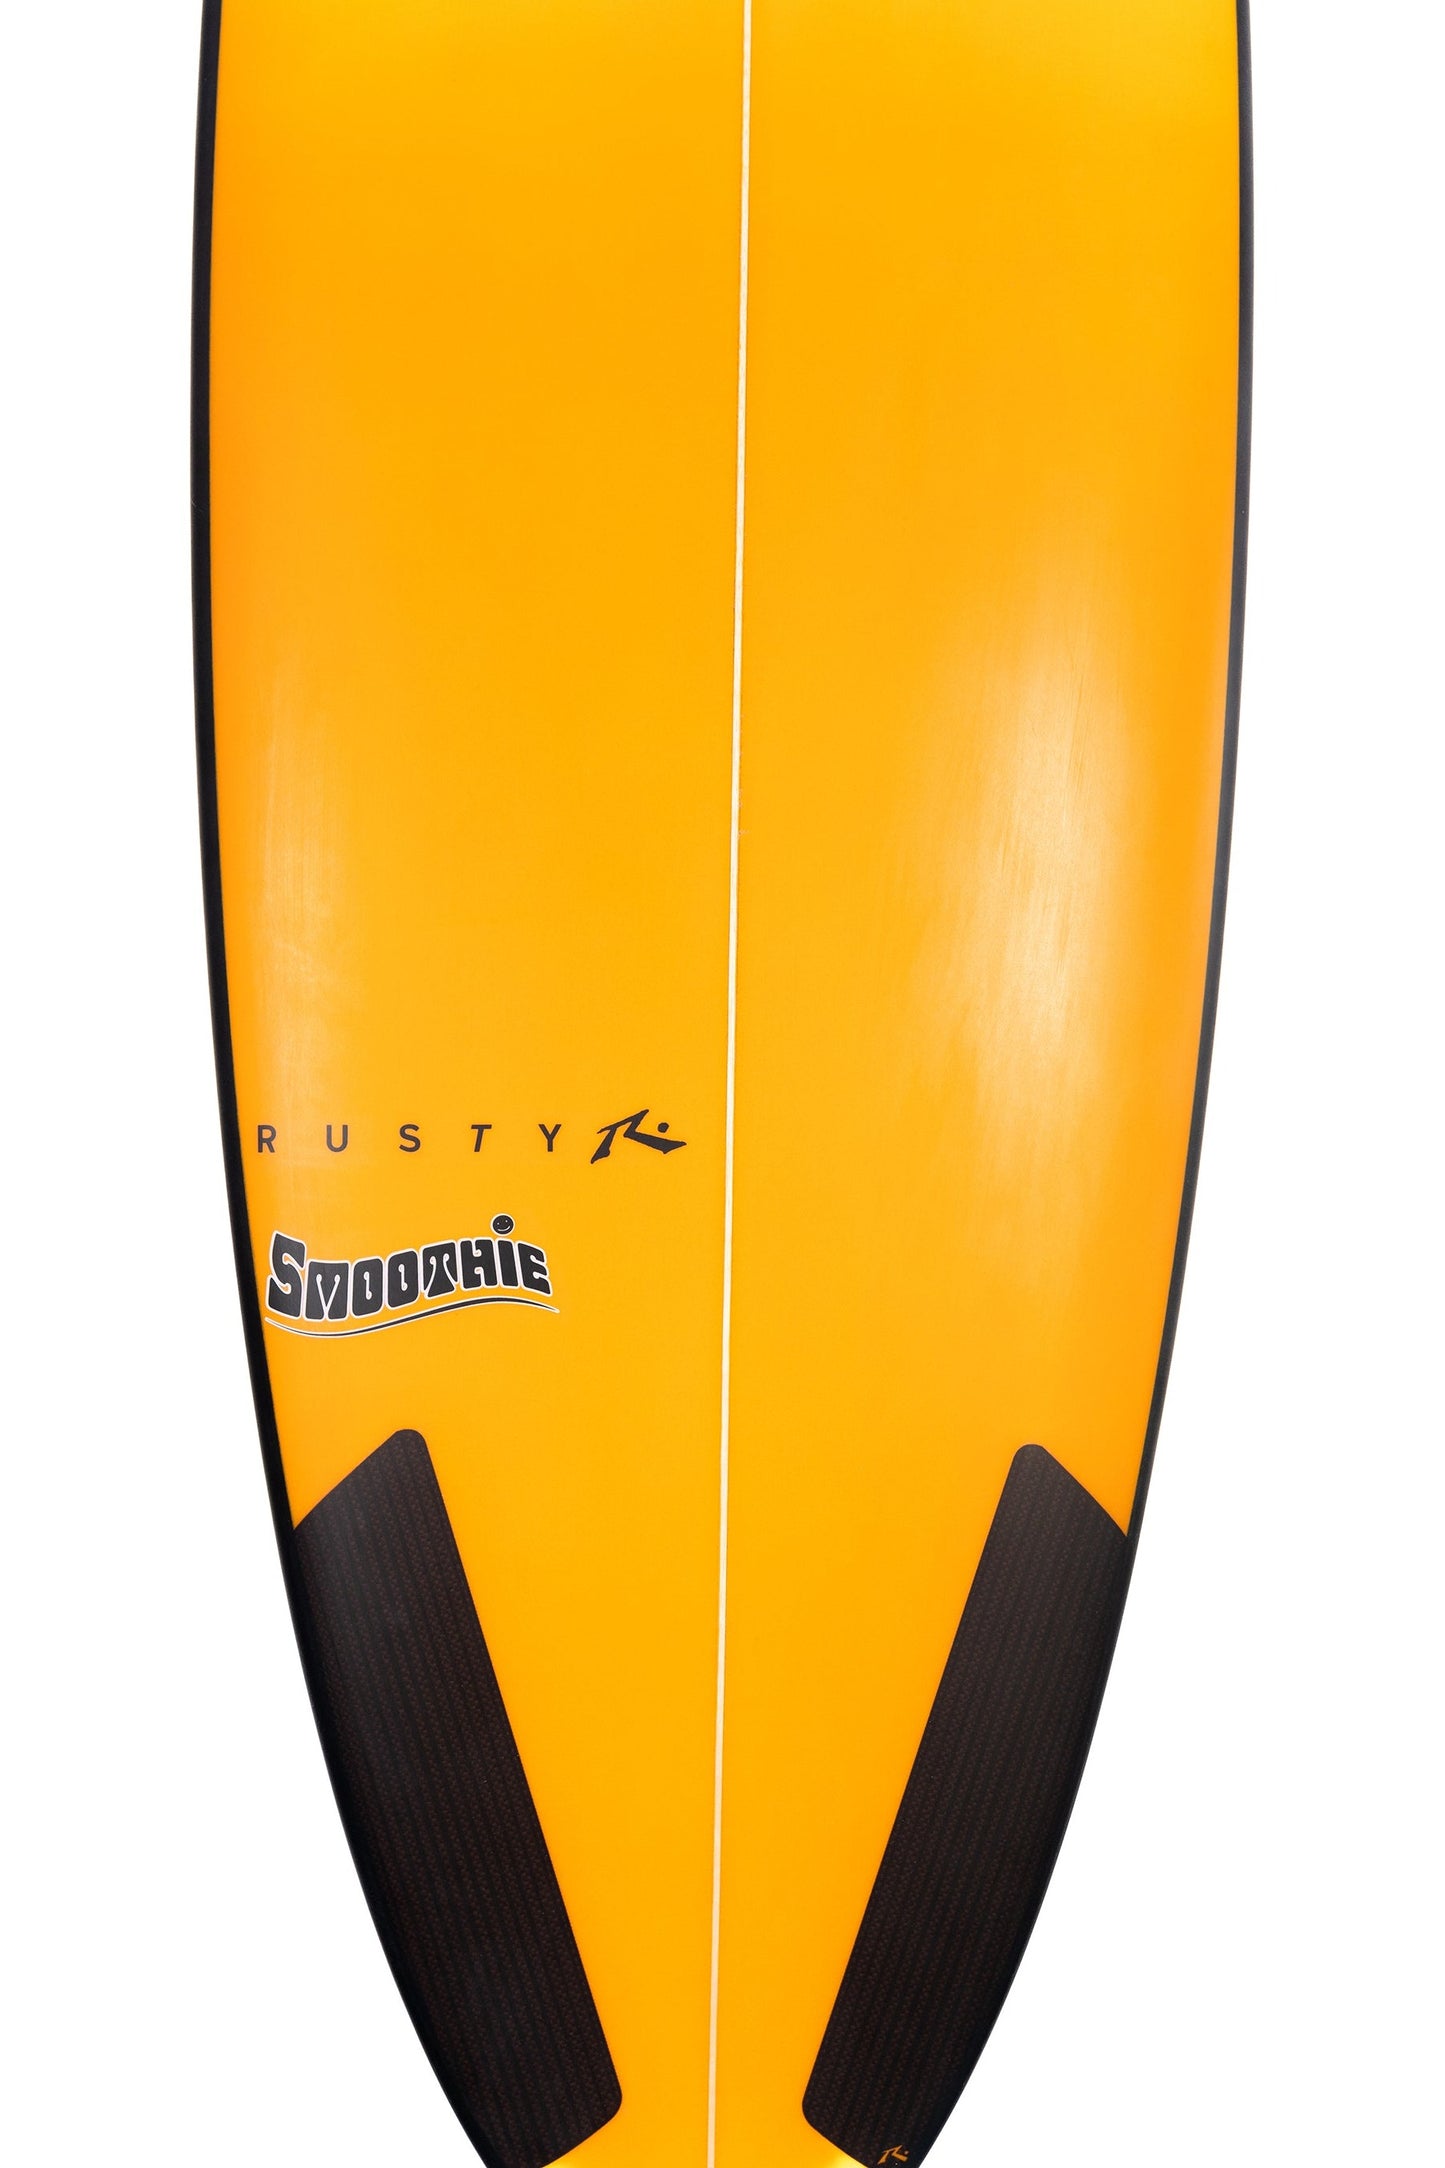 Surfboard Rusty Smothie 6' 3"